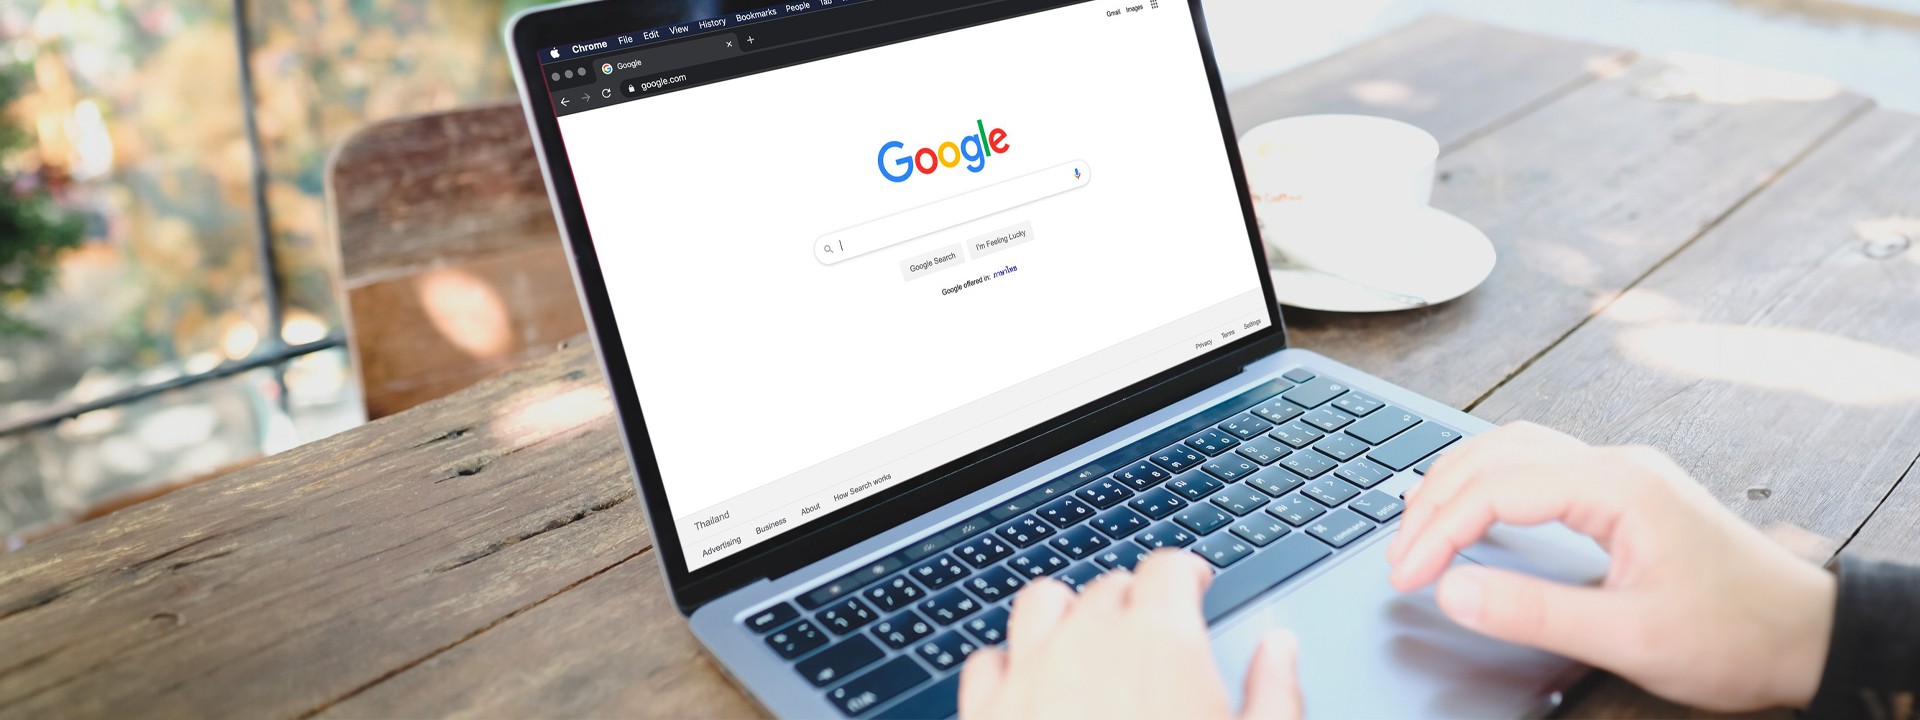 A person typing on a laptop with the google logo on it.